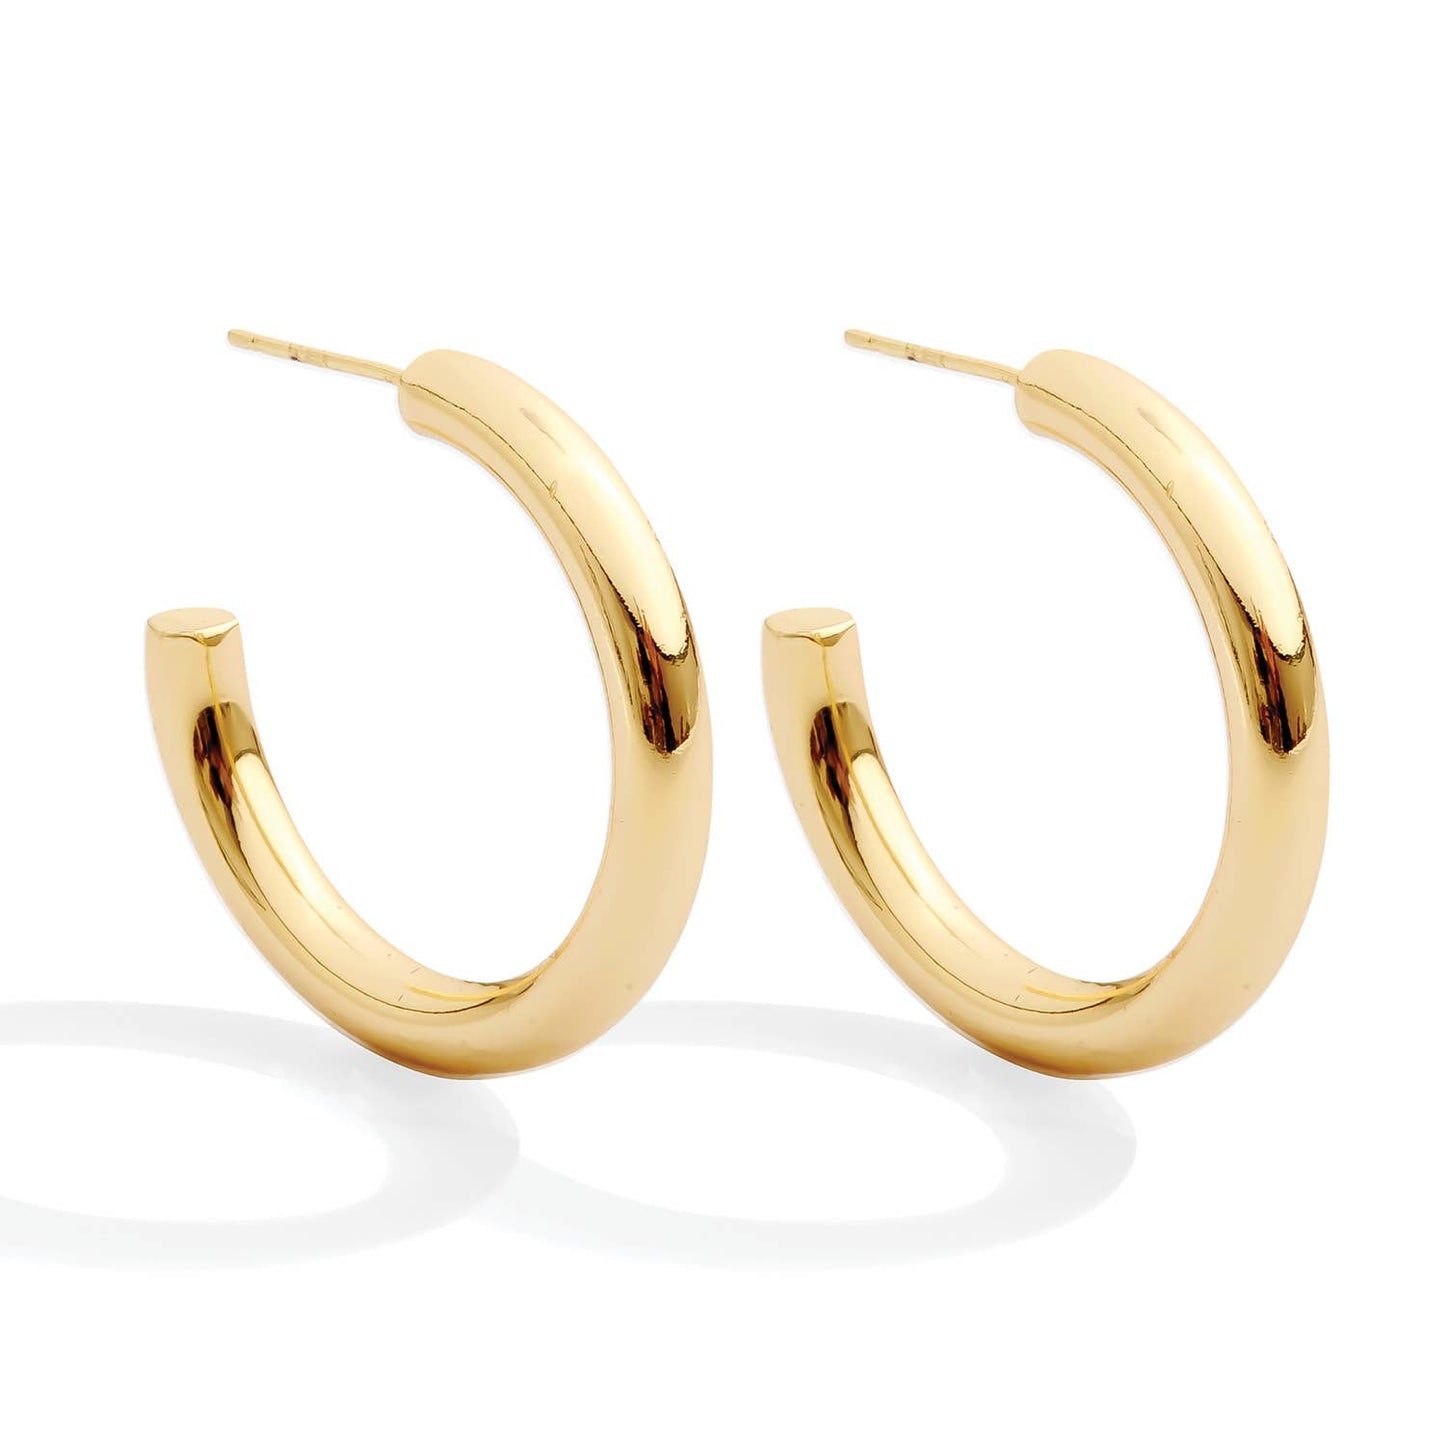 The Perfect Hoop Earrings: Gold